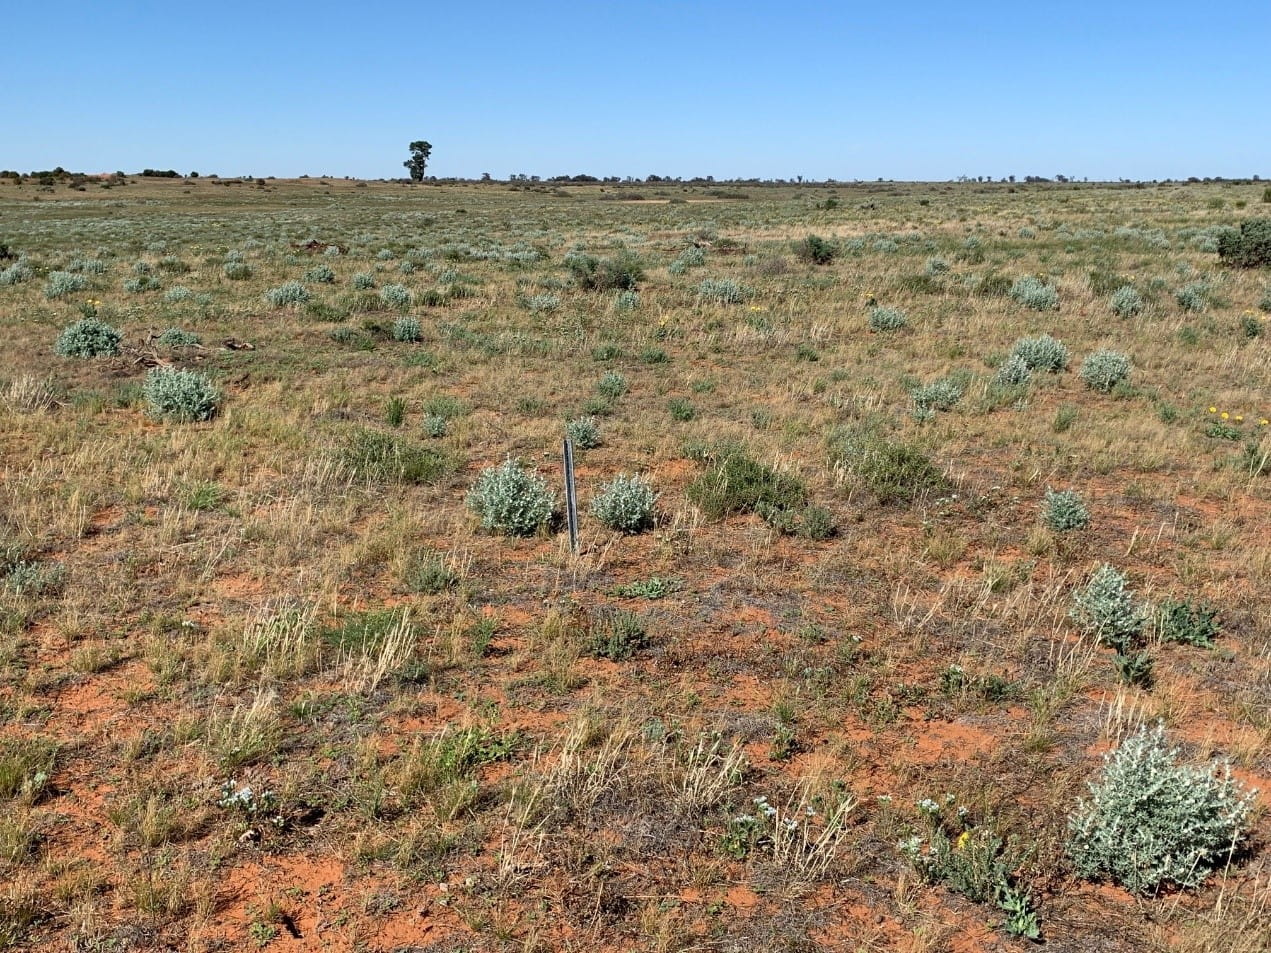 Pippins Management Area in 2021 with native flora growth across the landscape